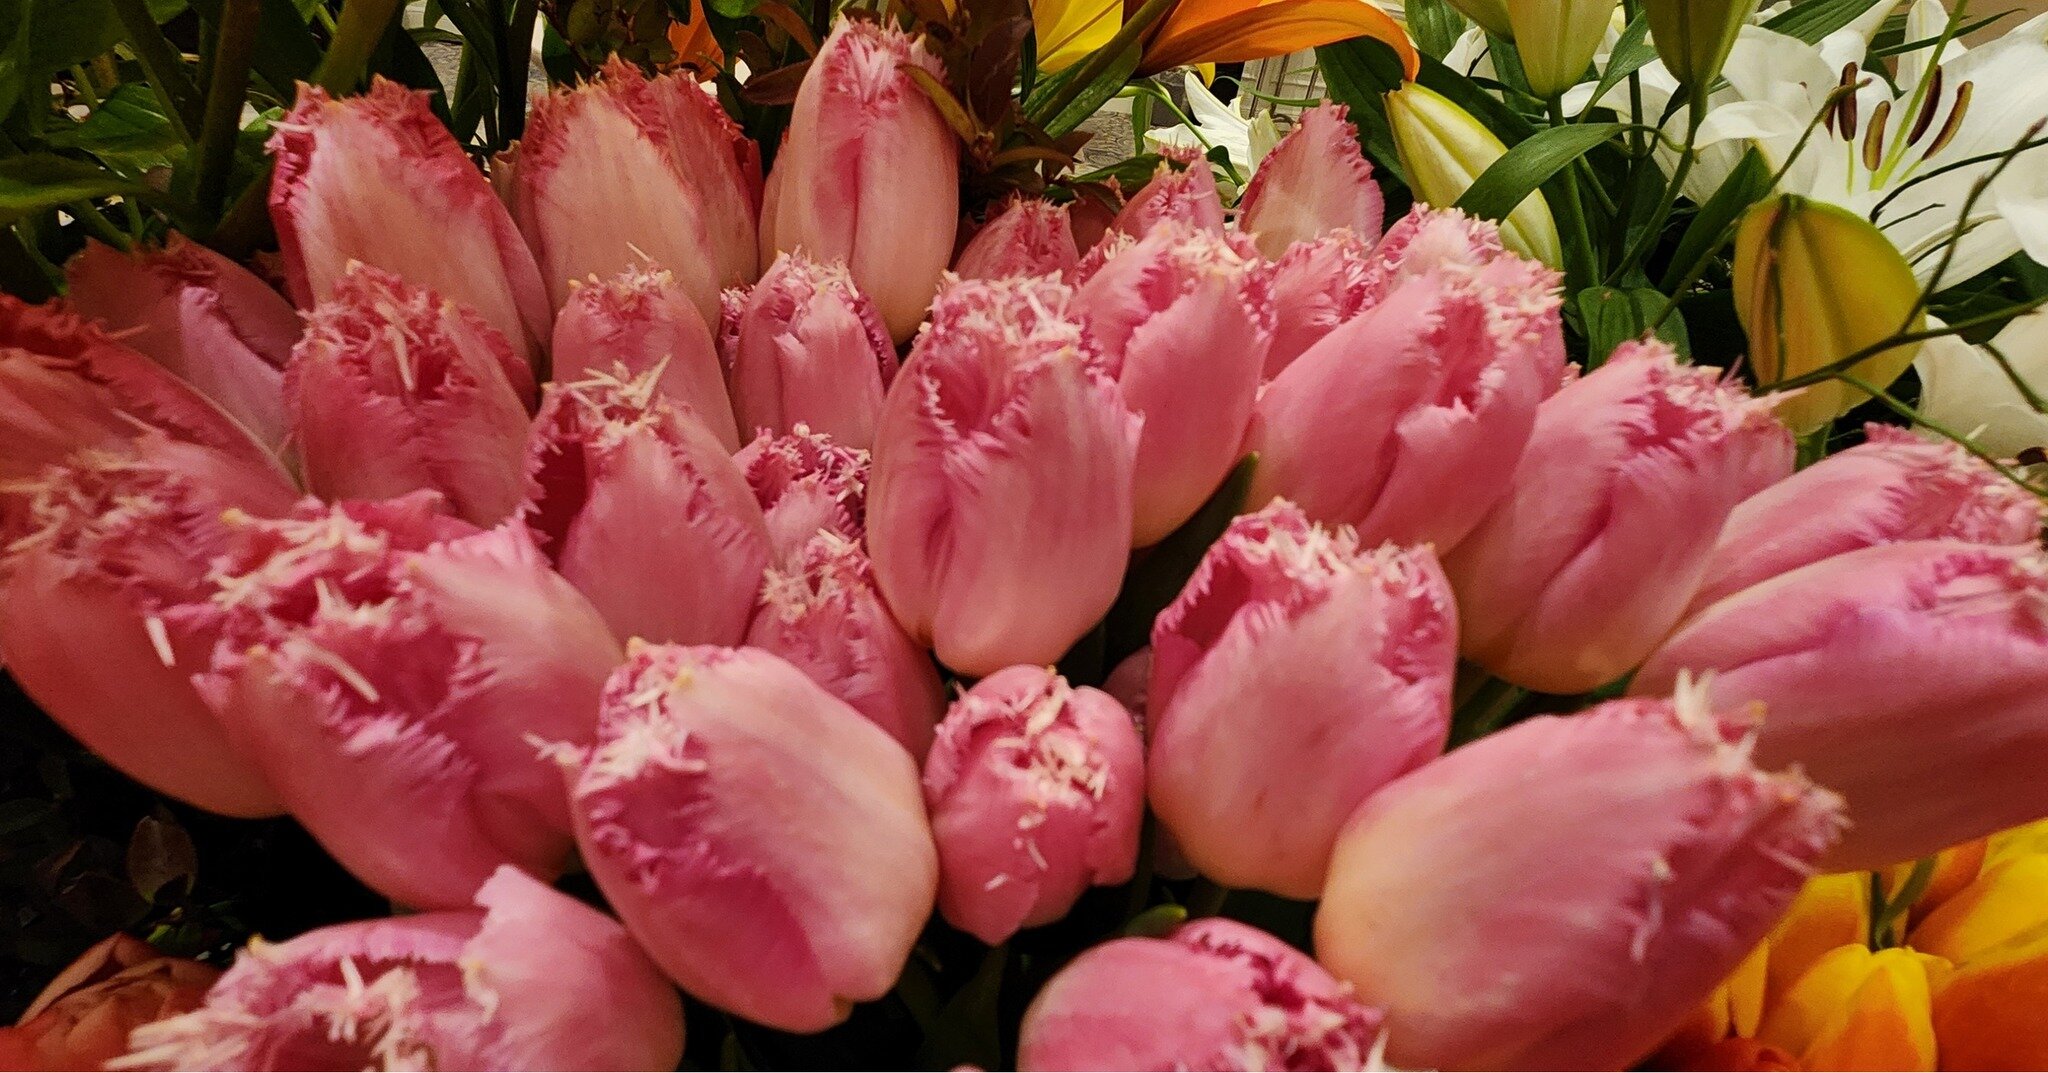 Want tulips? We got them! Classic, Fringe, Doubles, &amp; Novelty Tulips available. Ask your Sun Valley sales rep what's their favorite variety 🌷🚛😍 #BlossomMagic #bayarea #tulipday #FlowerPower #SpringBlooms #BloomingBeauty #NaturePhotography #flo